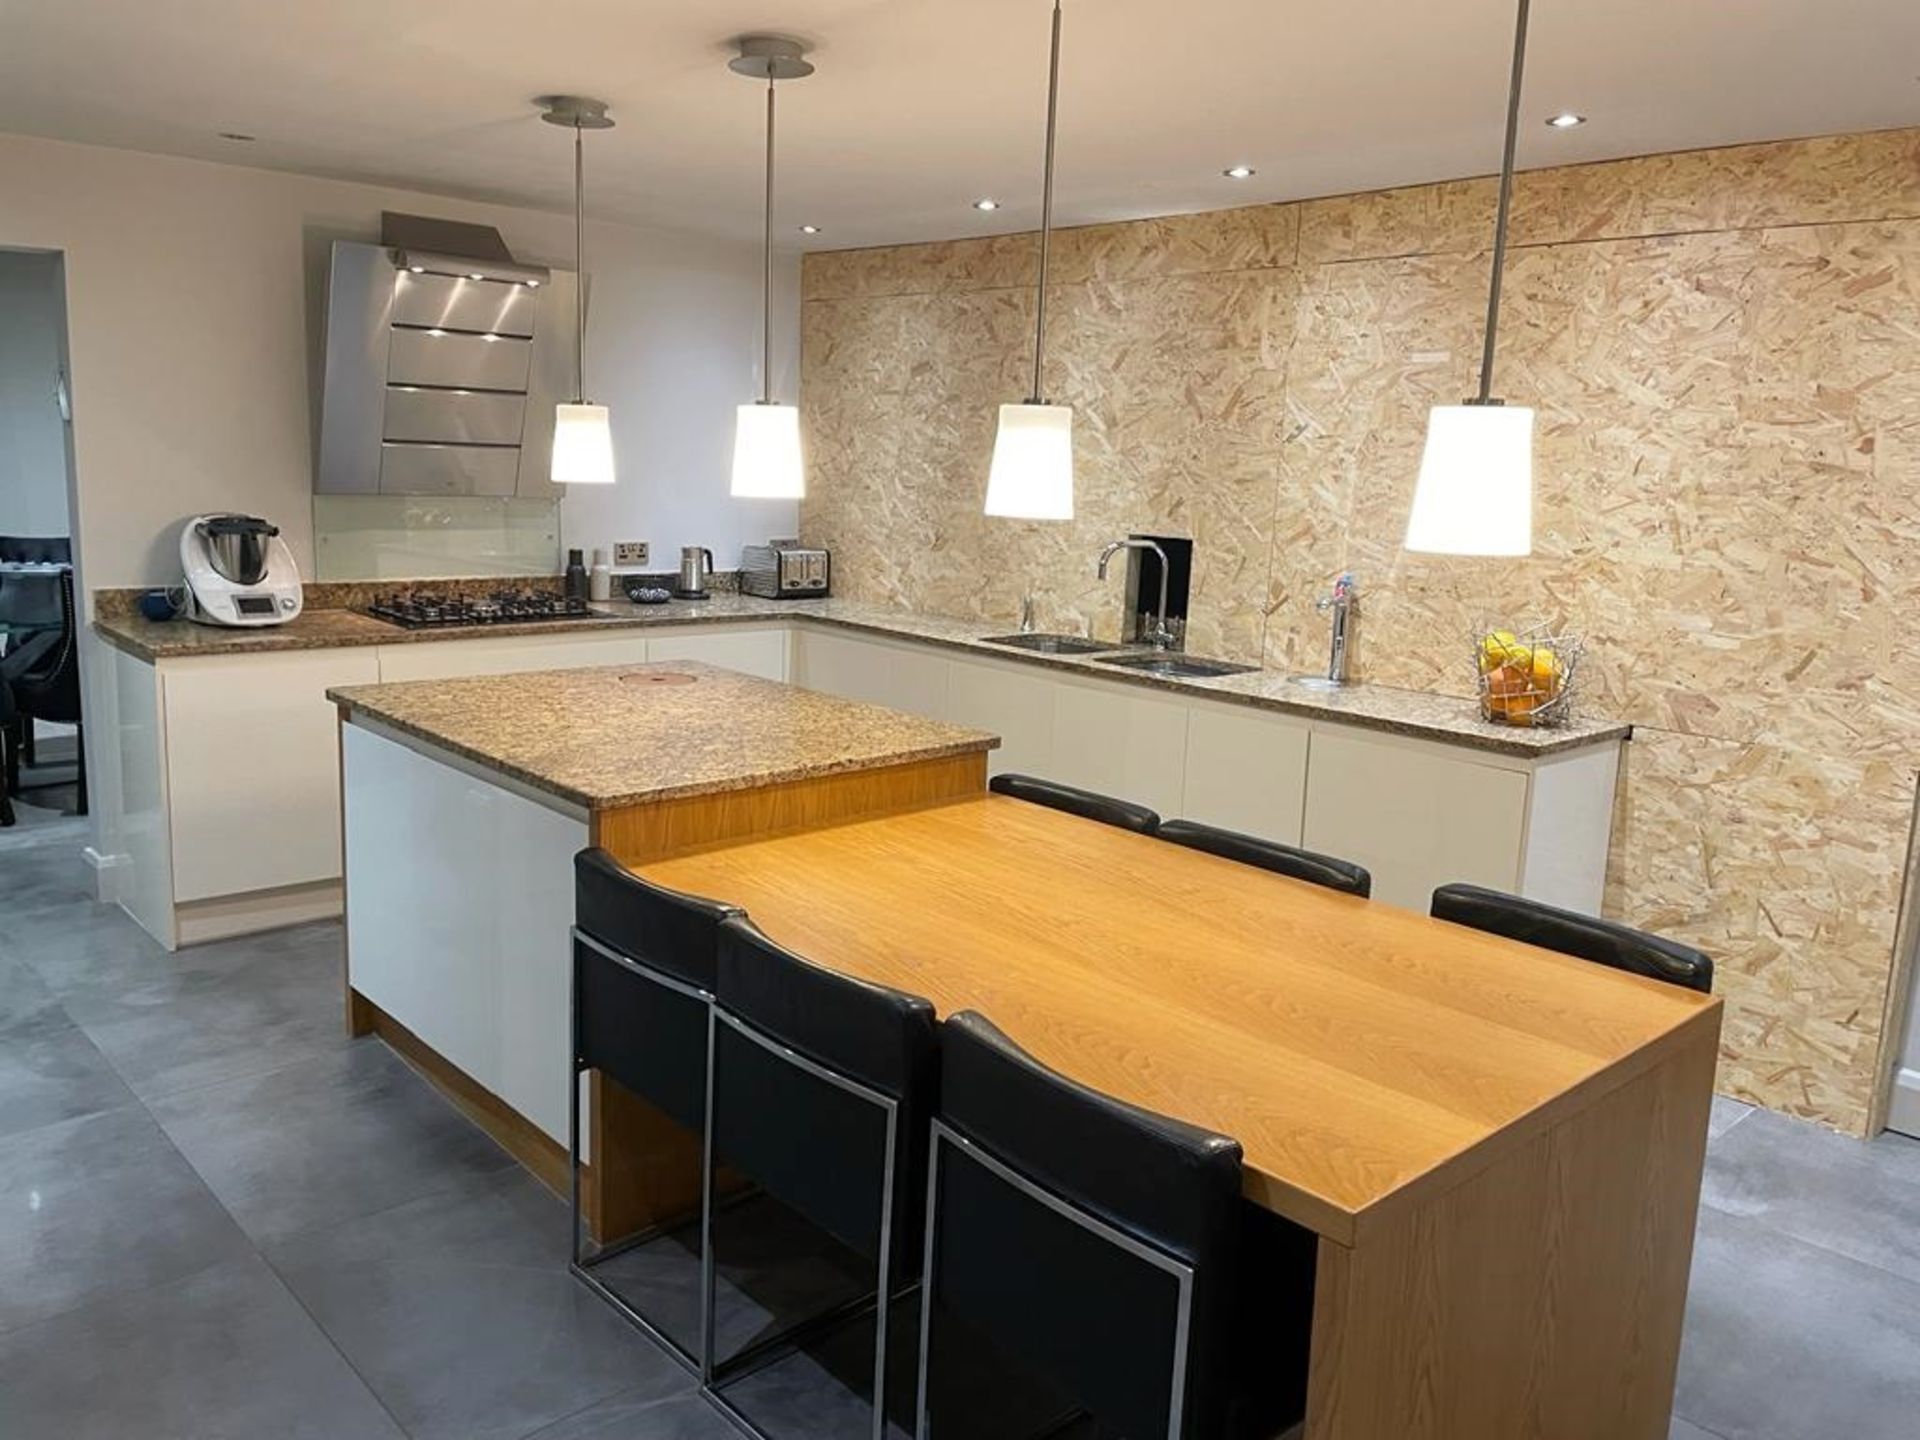 1 x Stunning PARAPAN Handleless Fitted Kitchen with Neff Appliances, Granite Worktops & Island - Image 105 of 126